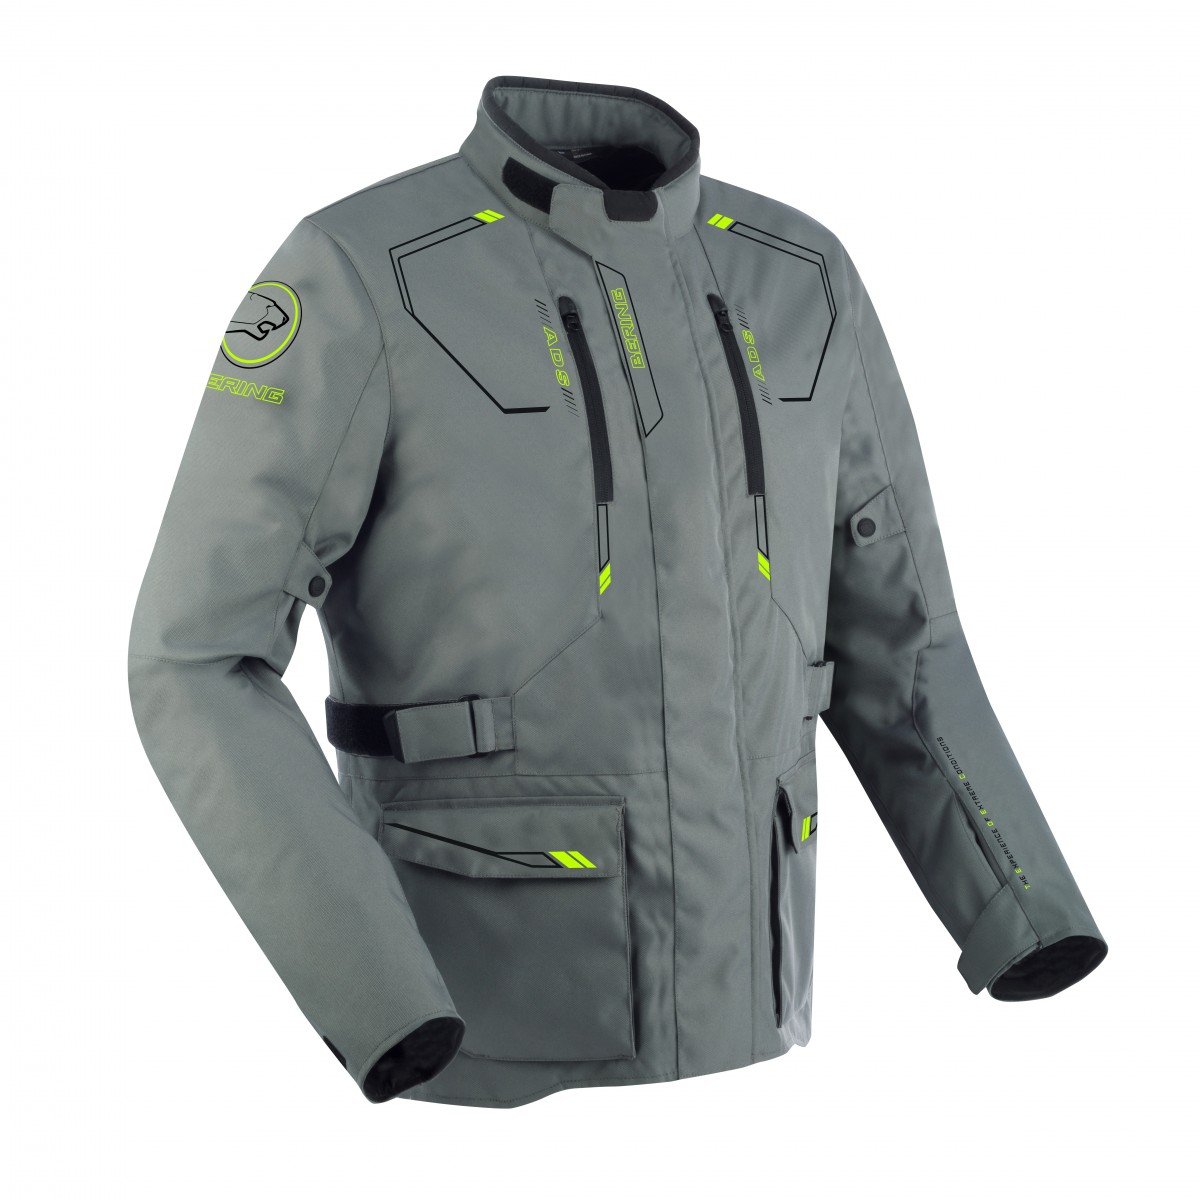 Image of Bering Voyager Jacket Gray Size XL ID 3660815169568